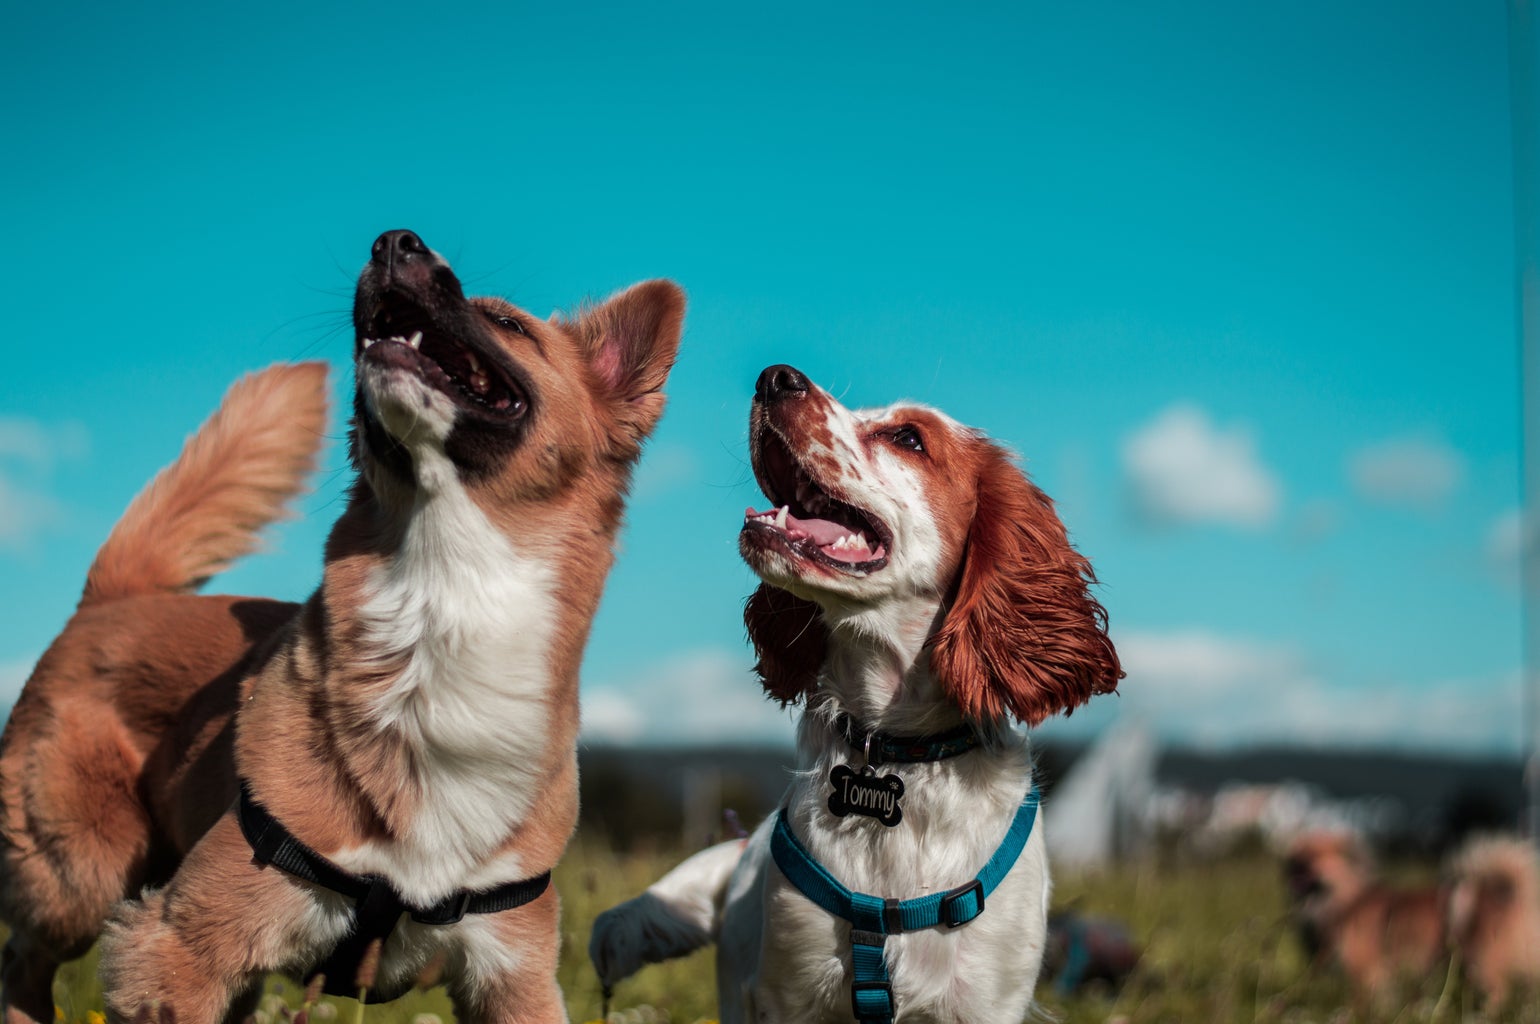 two brown and white dogs in a field outside